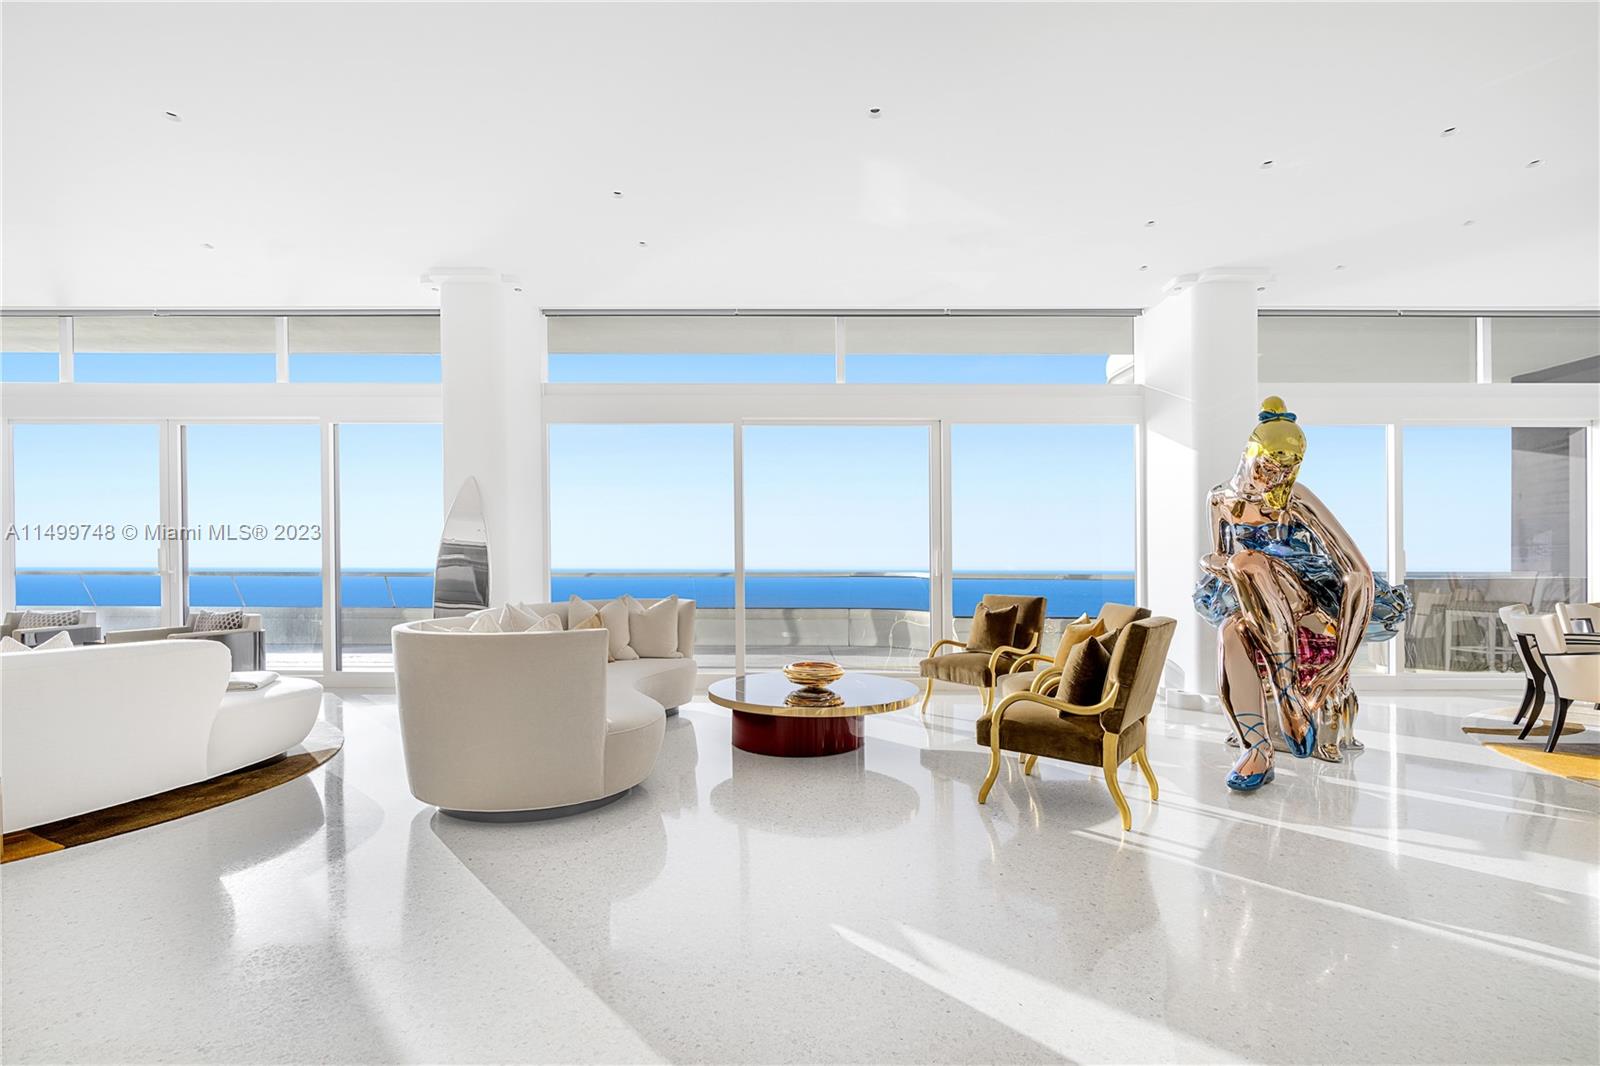 Soar above Miami Beach in this art deco masterpiece by Wetzels Brown Partners, atop Foster + Partners' Faena House. Step into your 6,400 SF kingdom, immersed in curated masterpieces & panoramic 270° views of the city & ocean. 6 beds/6.5 baths, Nanz ebony handles & Italian Terrazzo floors, this is luxury living redefined. Host a dinner party or gather by the custom Metrica bookcase w/ LED accents overlooking the Atlantic Ocean. Culinary dreams ascend in the Molteni kitchen. Oceanfront primary suite is a sanctuary of ebony furnishings & tranquil serenity. Every detail bespoke—textured, hand-painted walls in bedrooms whisper opulence. Dornbracht & Duravit fixtures exude quality. Live smarter w/ Crestron Home Automation. More than a penthouse it's a statement. Own a piece of Miami Beach's sky.